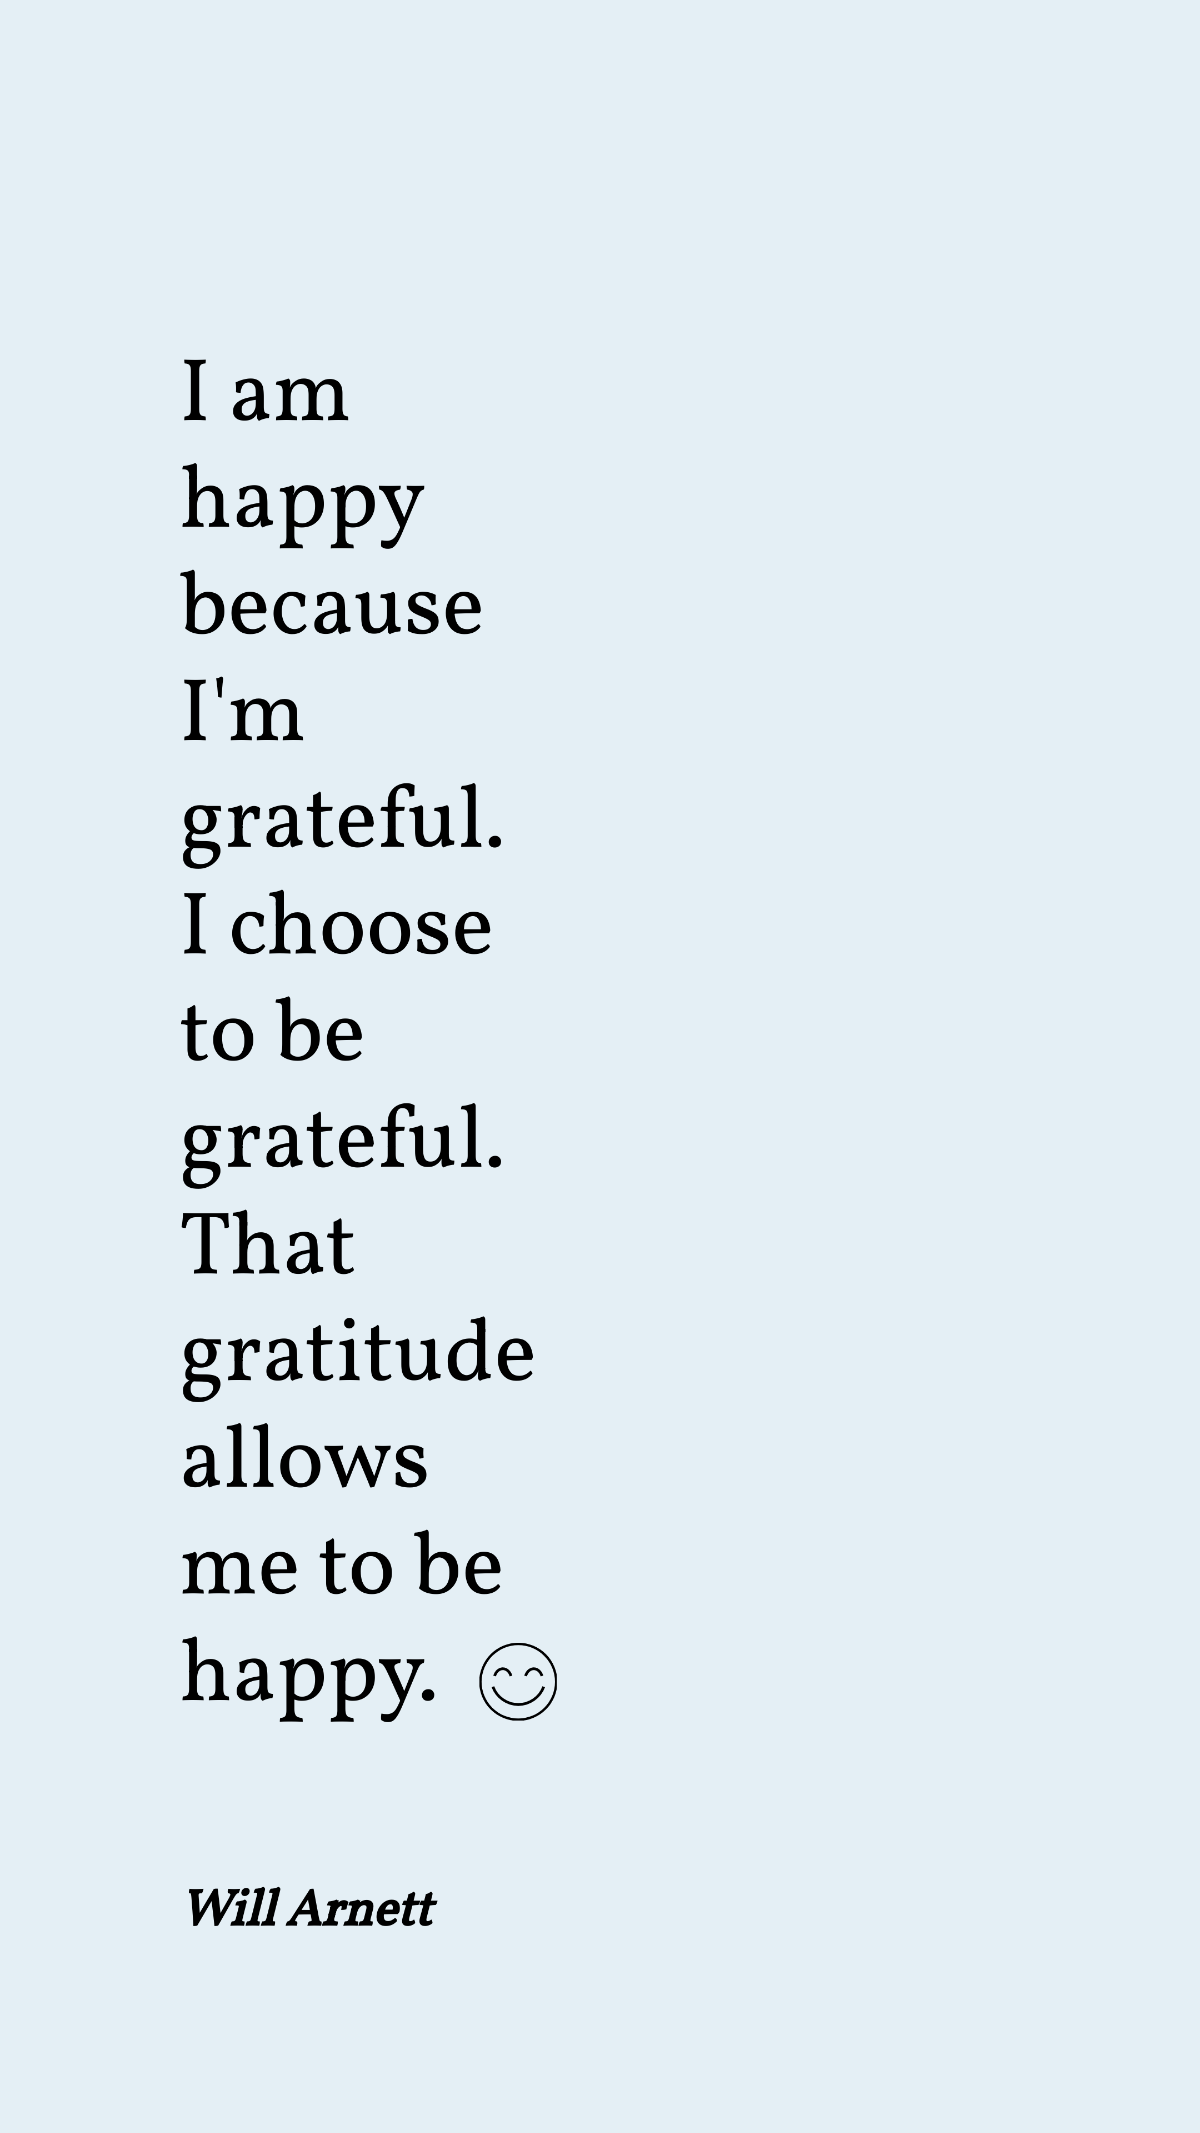 Will Arnett - I am happy because I'm grateful. I choose to be grateful. That gratitude allows me to be happy.